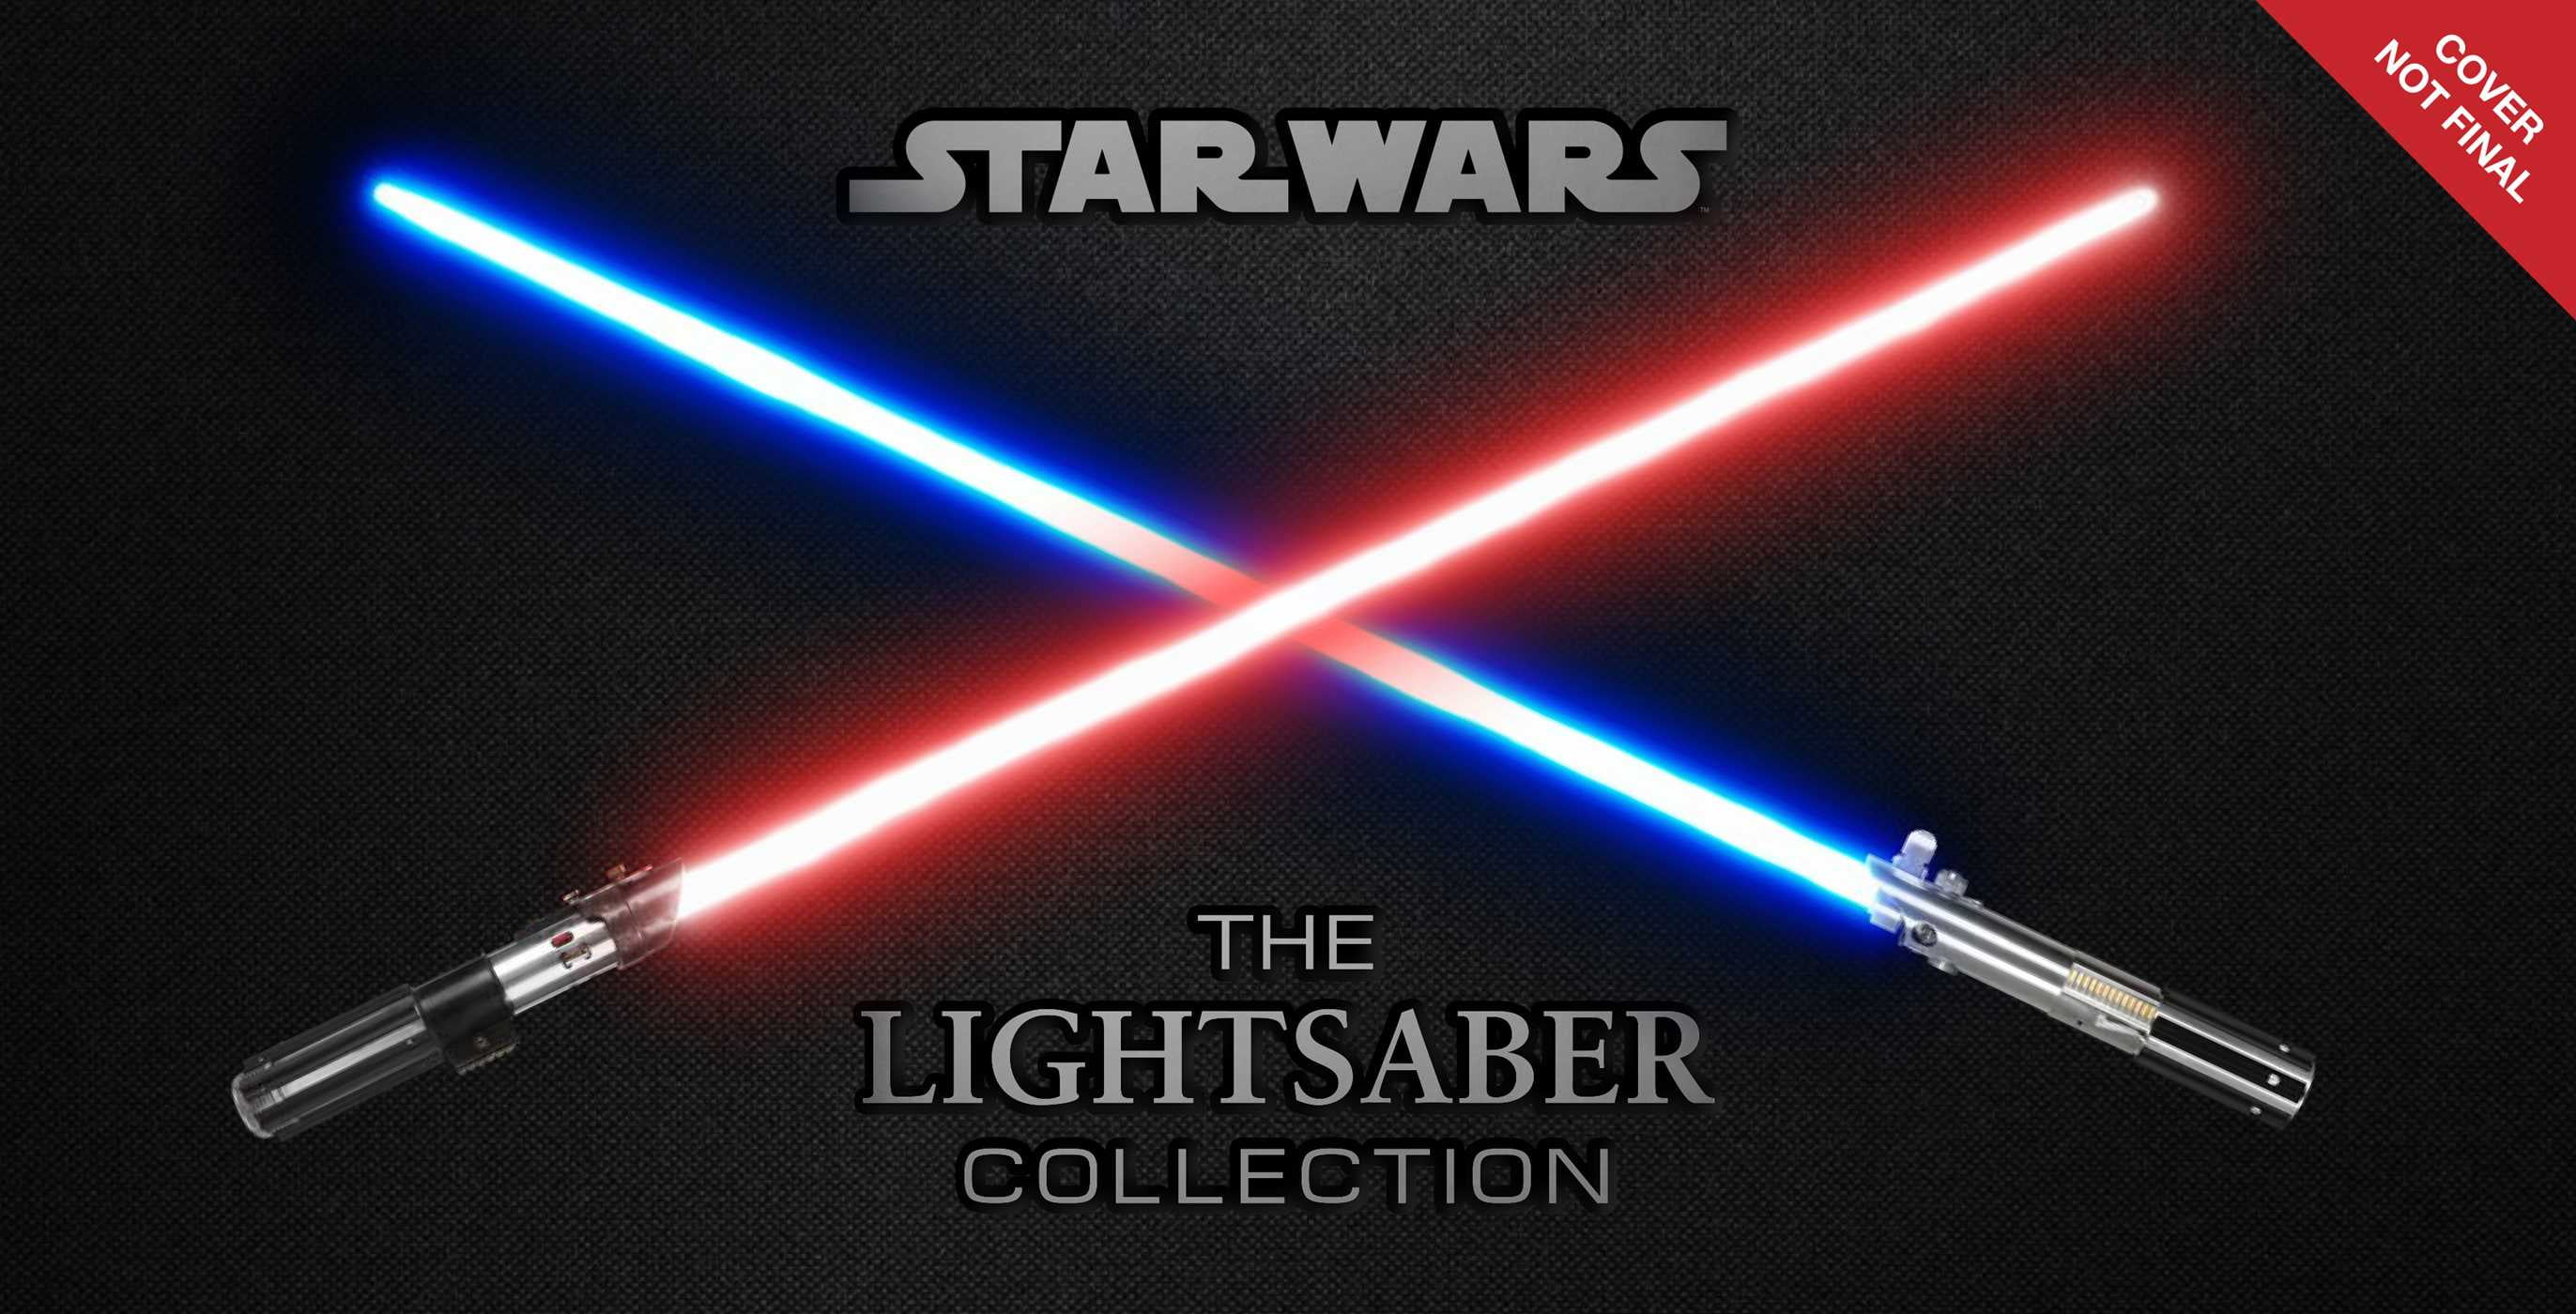 Star Wars: The Lightsaber Collection : Lightsabers from the Skywalker Saga